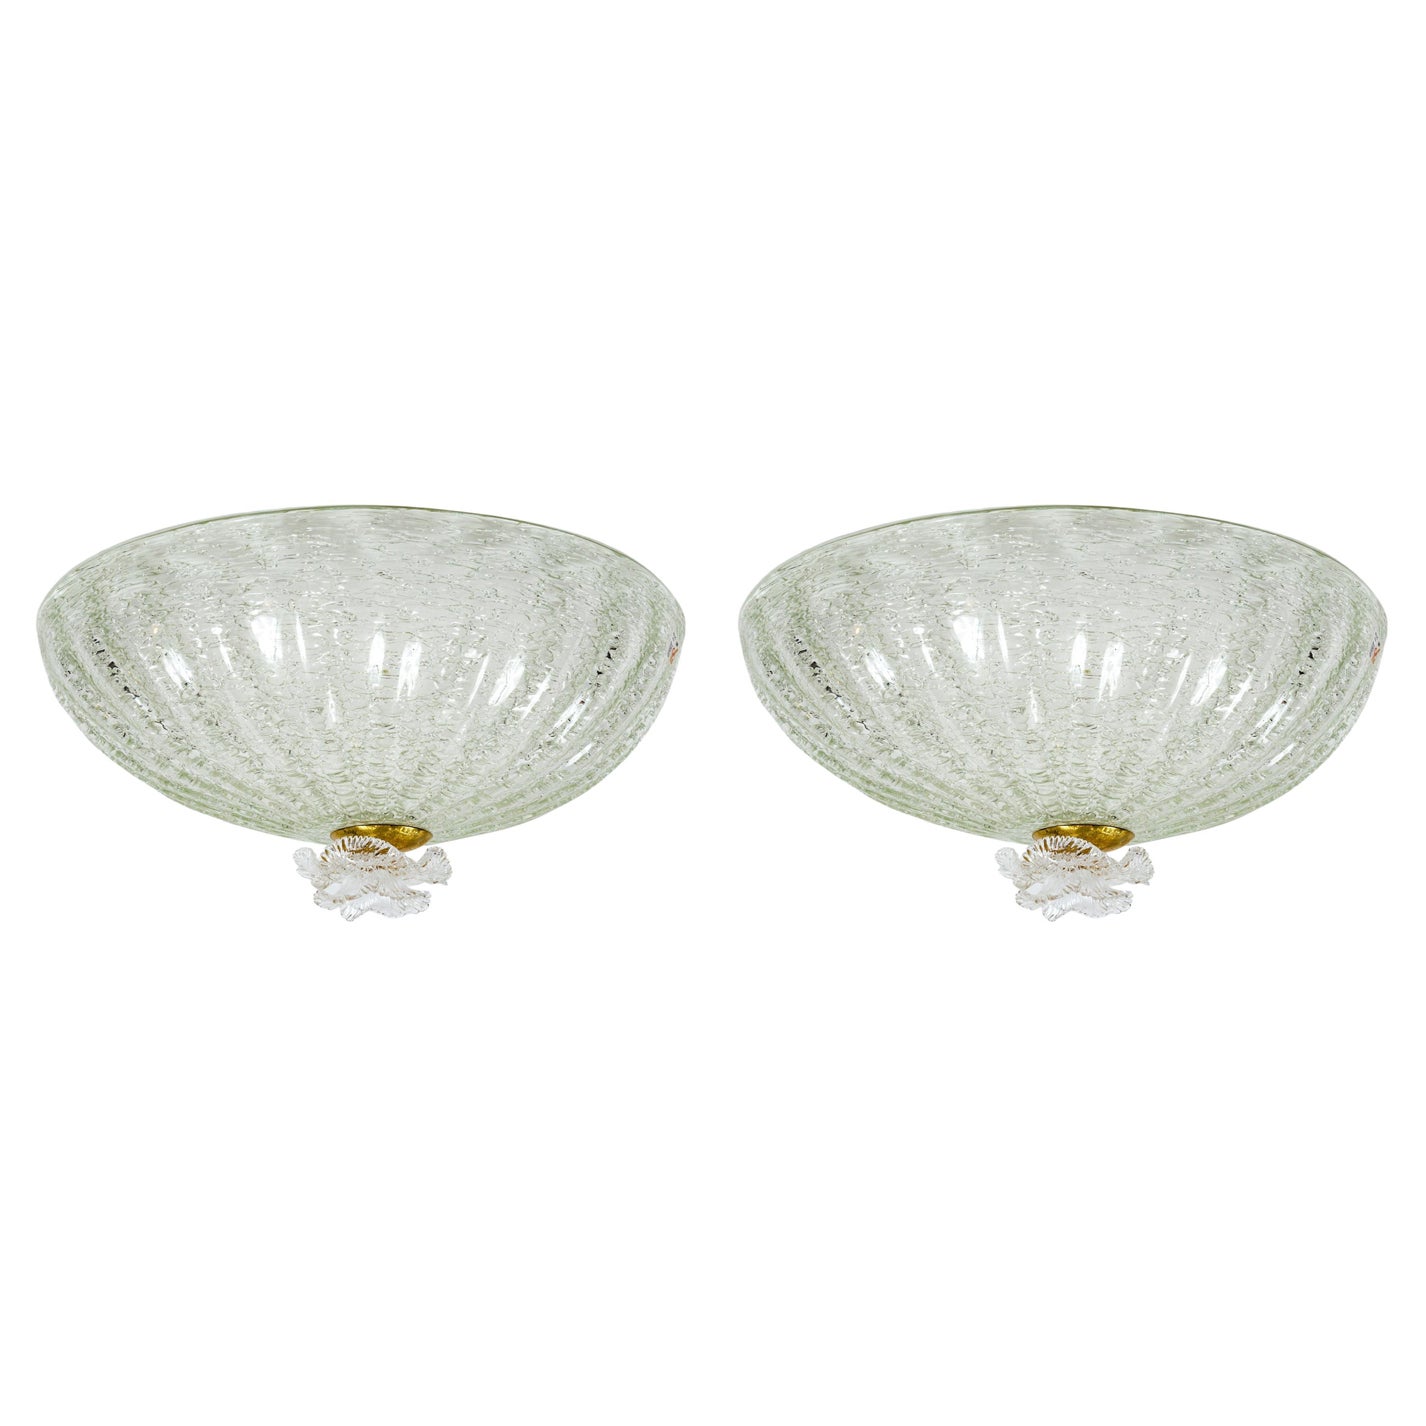 Pair of Murano Blown Dome-Shaped Semi-Flushmount Ceiling Fixtures, UL Certified